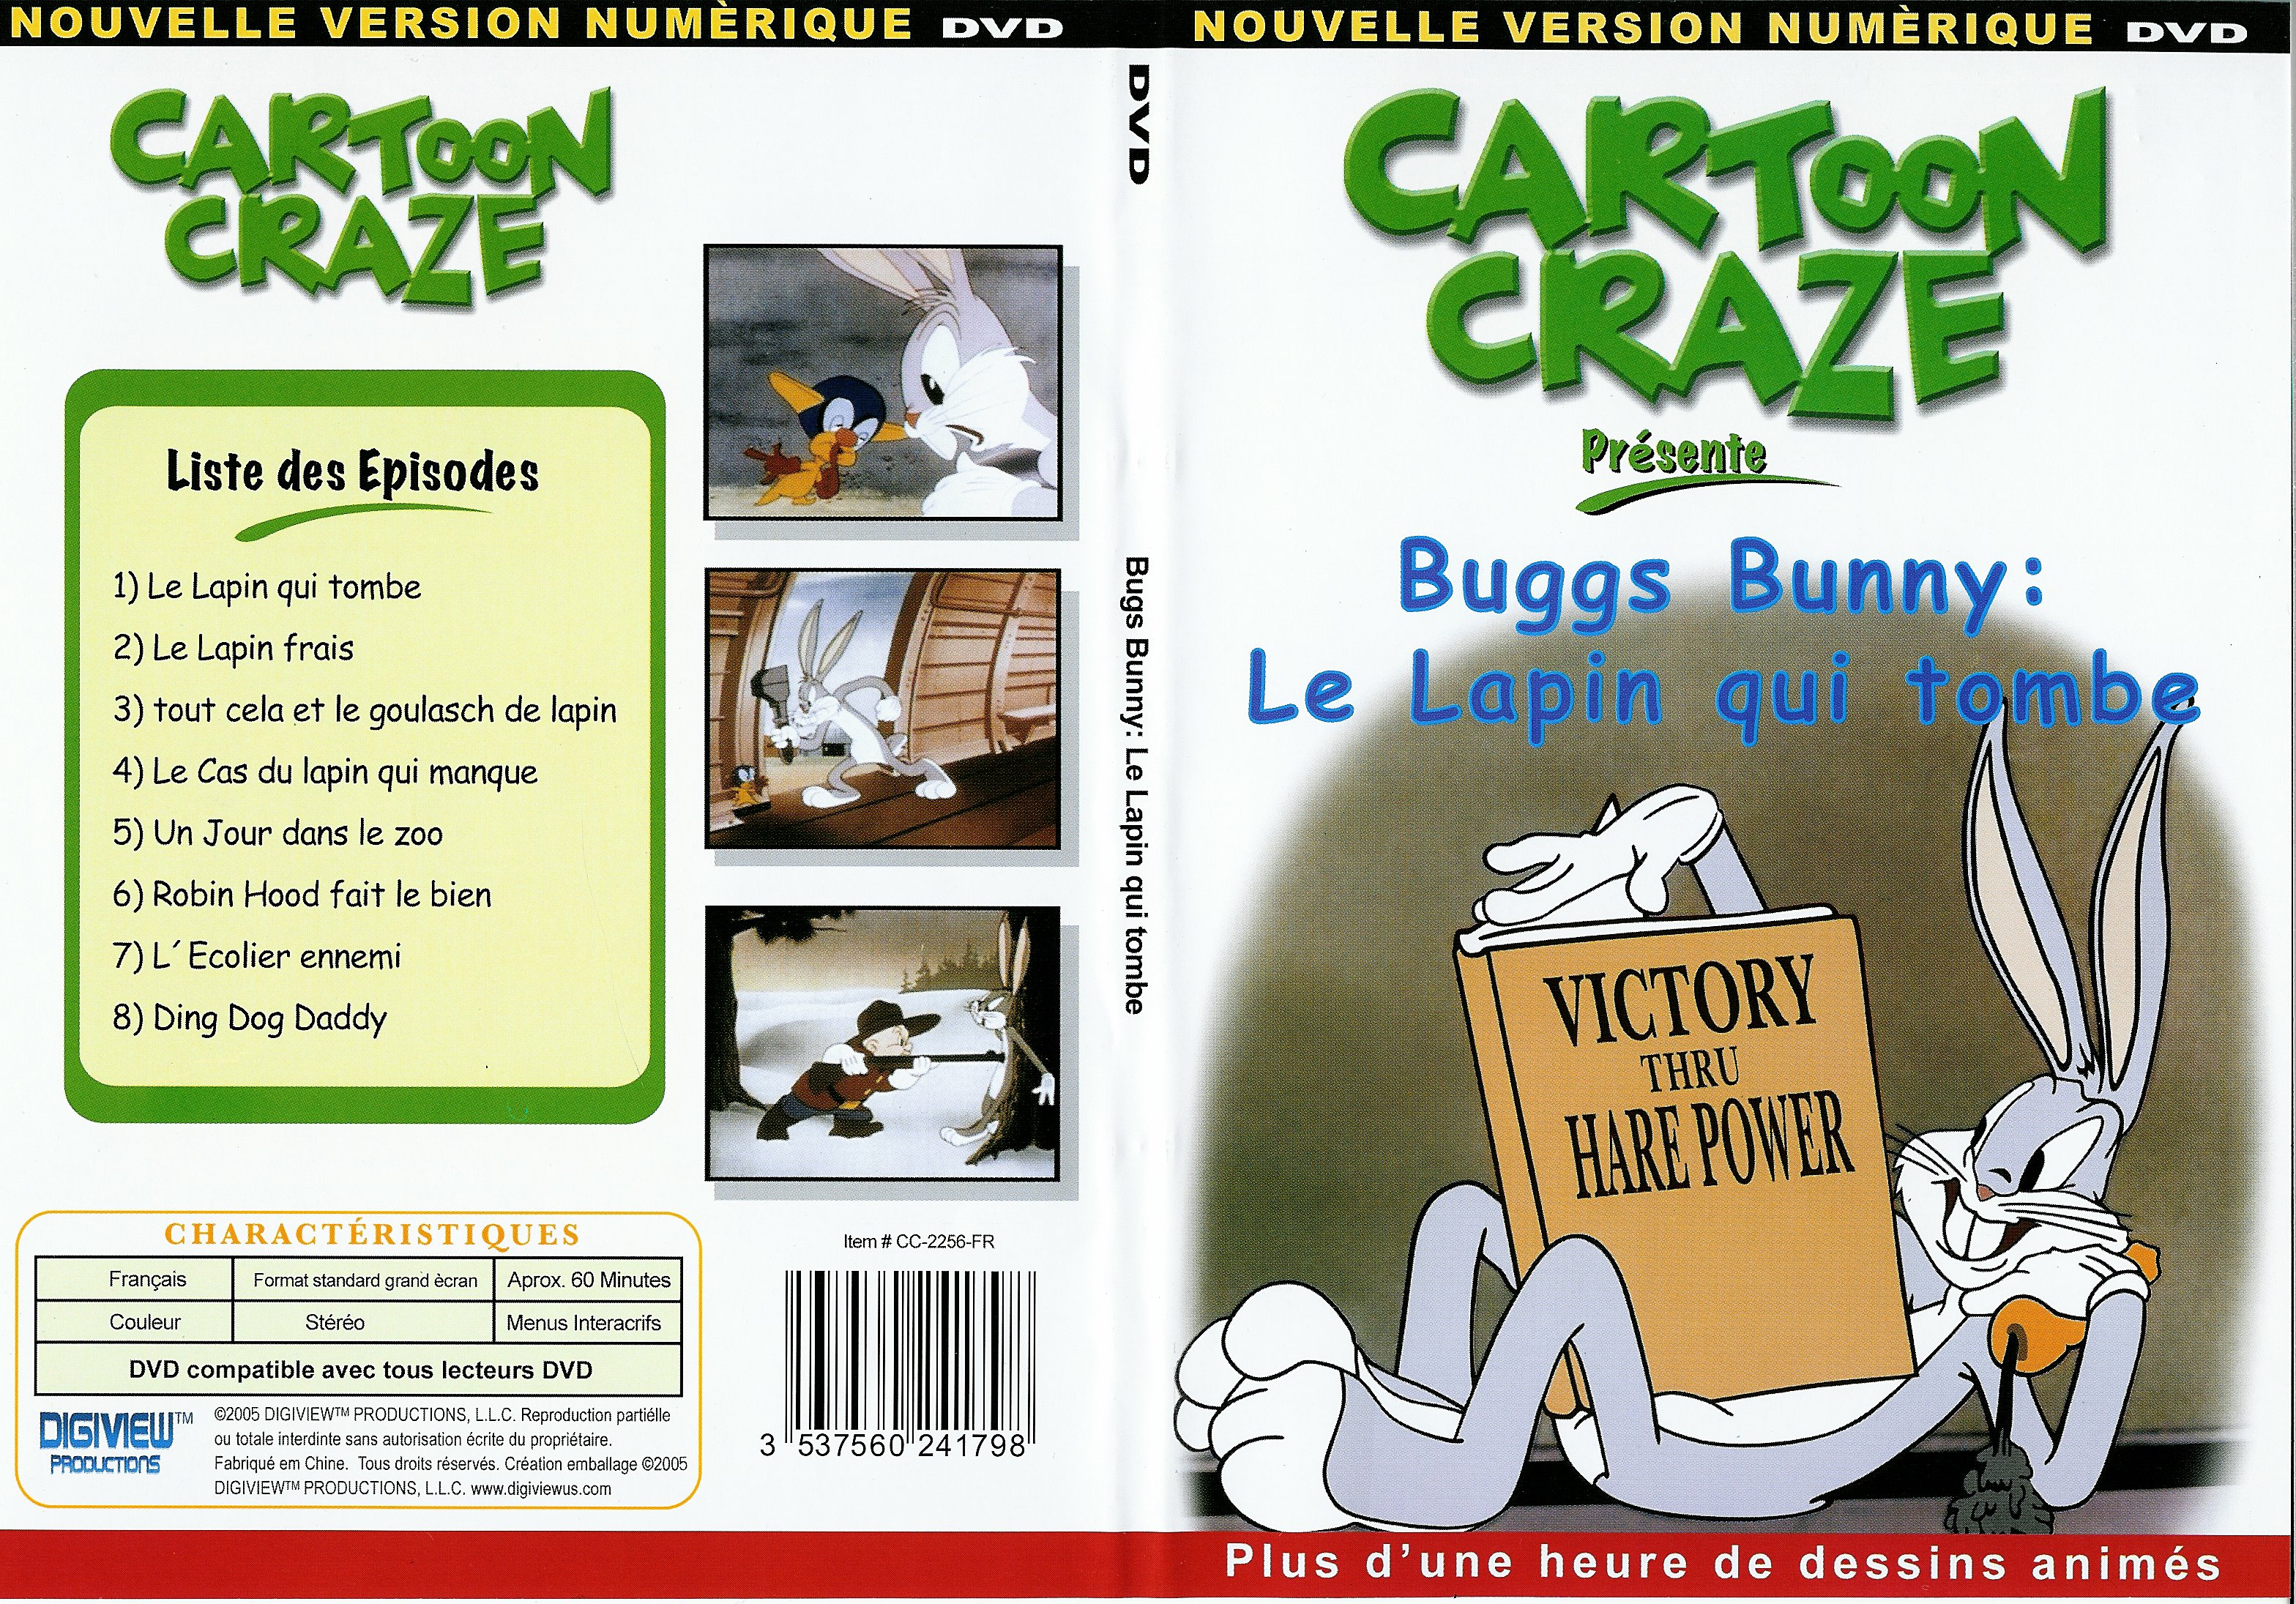 Jaquette DVD Buggs Bunny le lapin qui tombe - SLIM